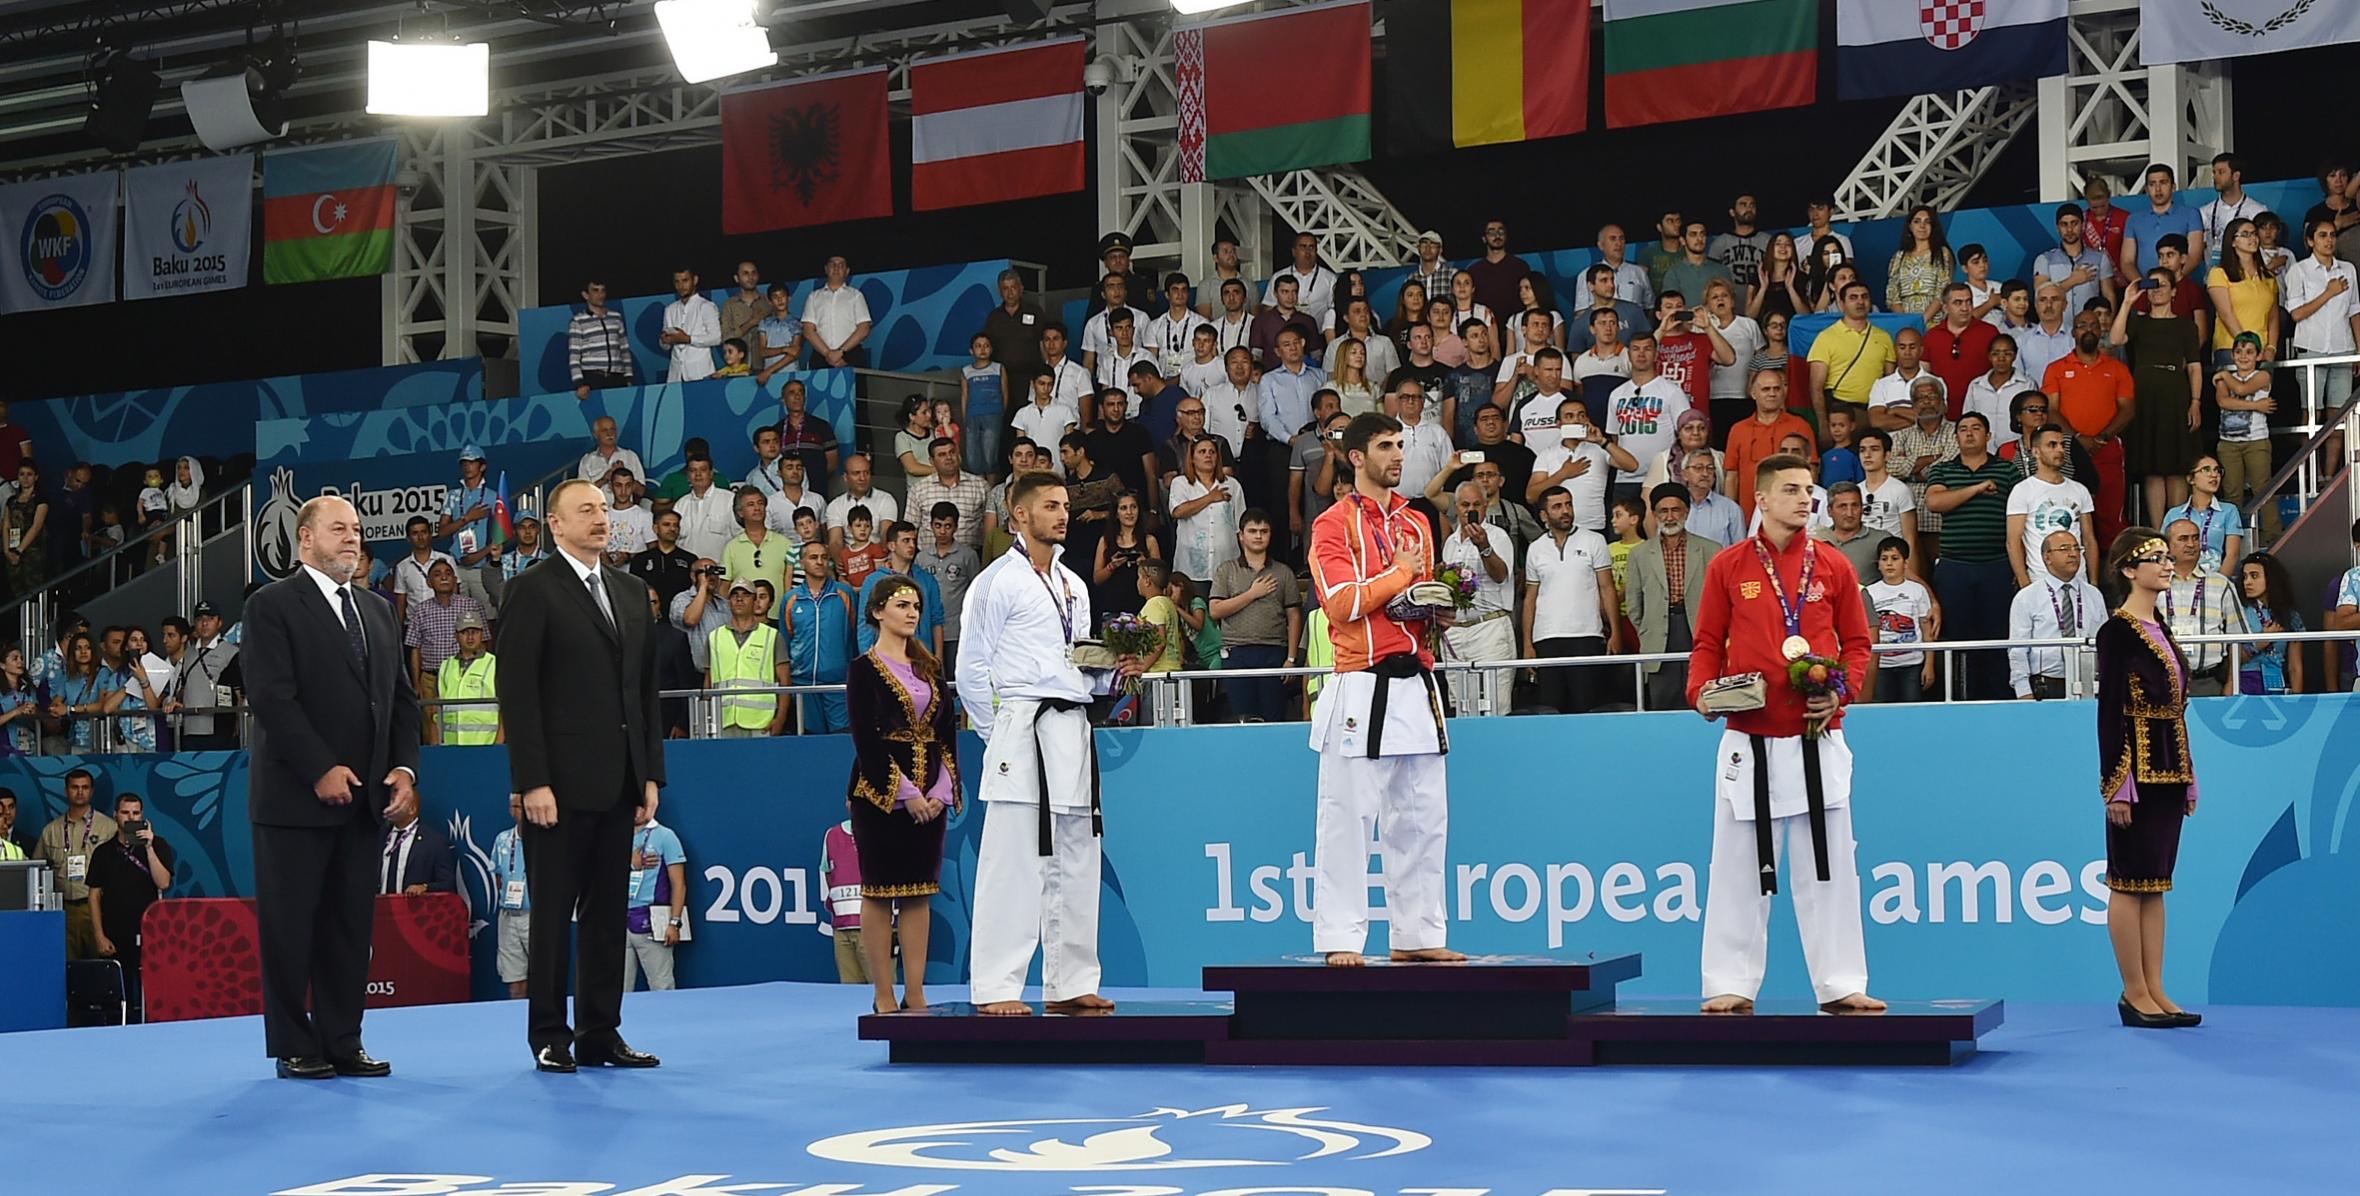 Ilham Aliyev presented the gold medal to the champion of the First European Games Firdovsi Farzaliyev